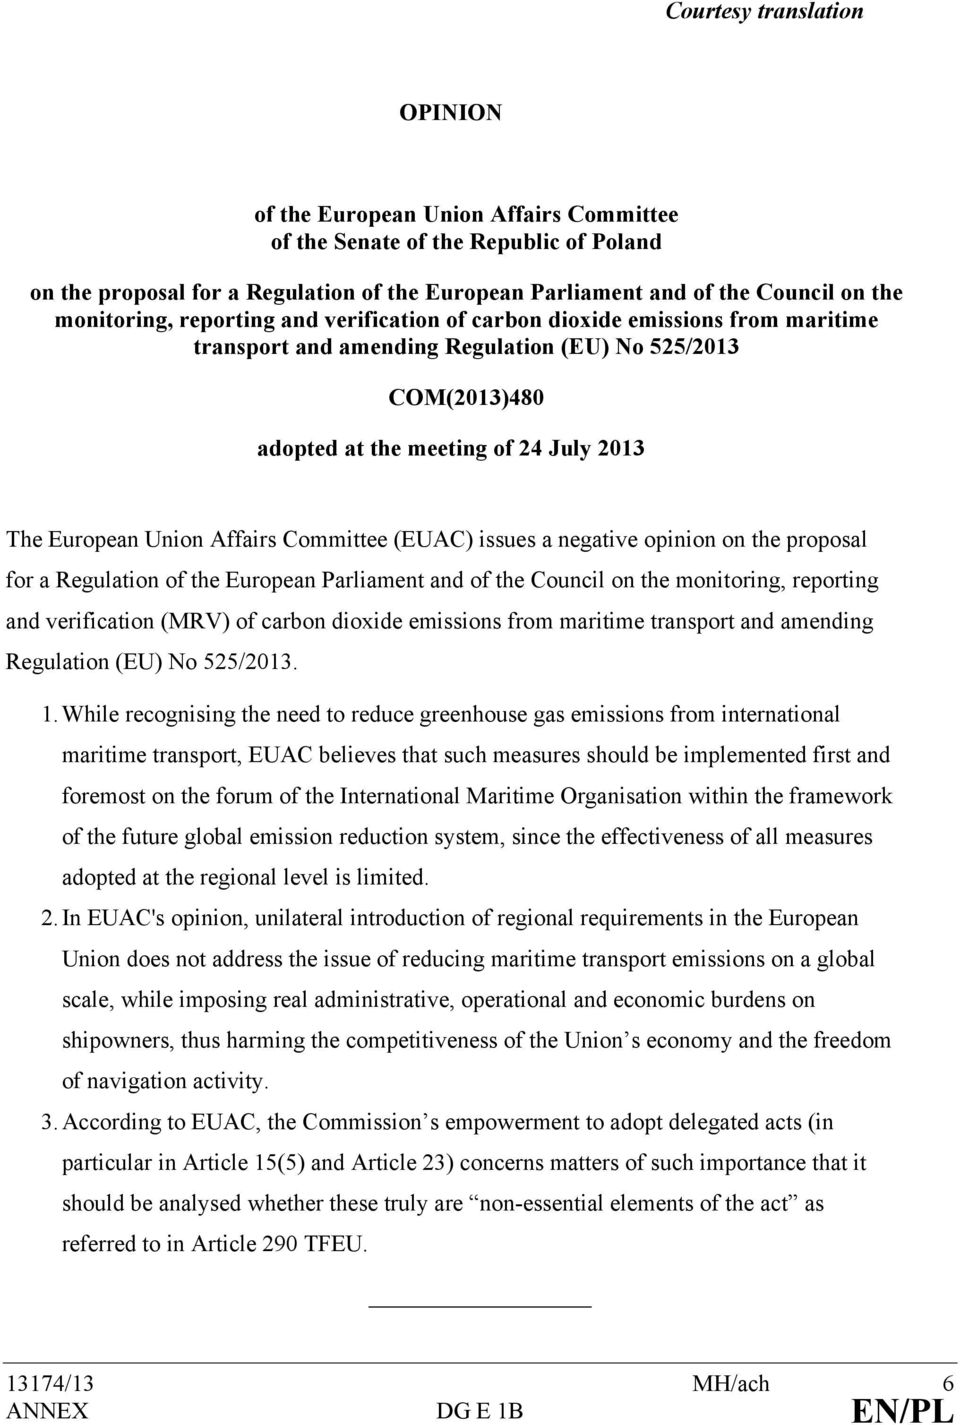 Union Affairs Committee (EUAC) issues a negative opinion on the proposal for a Regulation of the European Parliament and of the Council on the monitoring, reporting and verification (MRV) of carbon